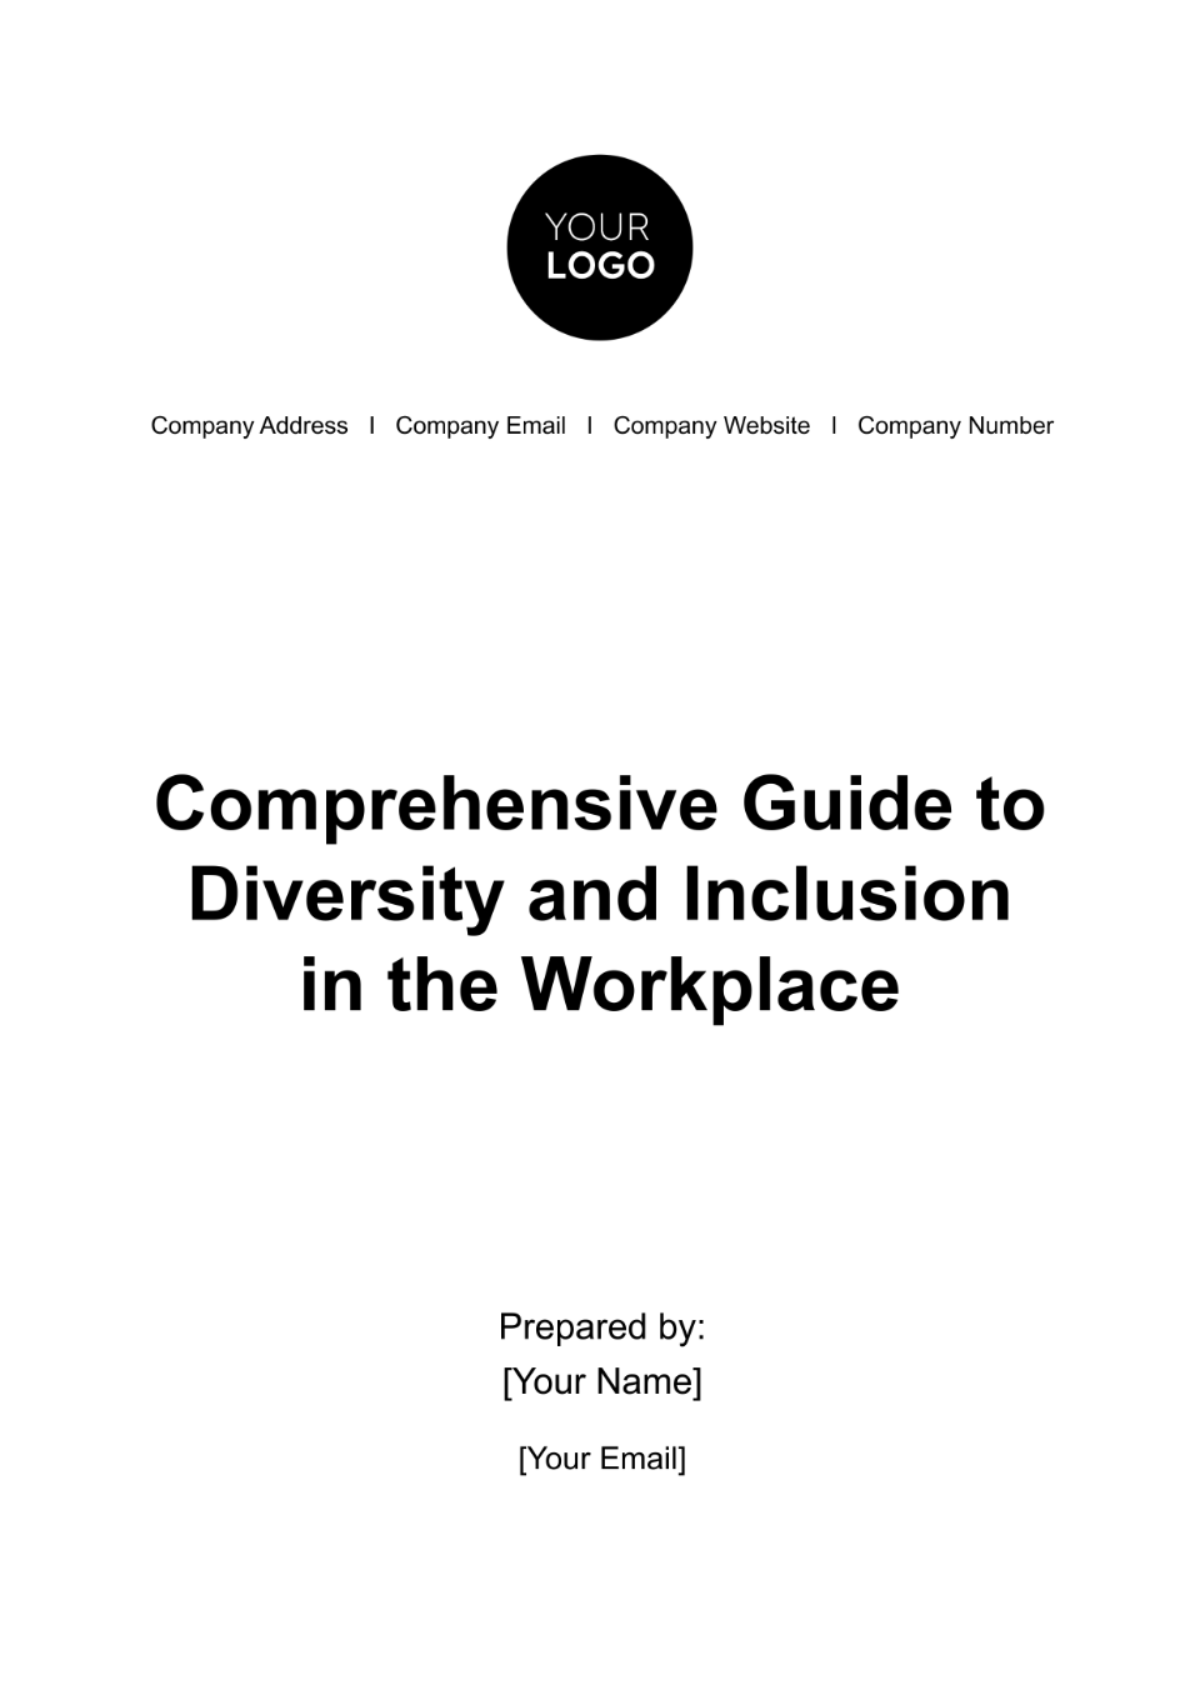 Free Comprehensive Guide to Diversity and Inclusion in the Workplace HR Template